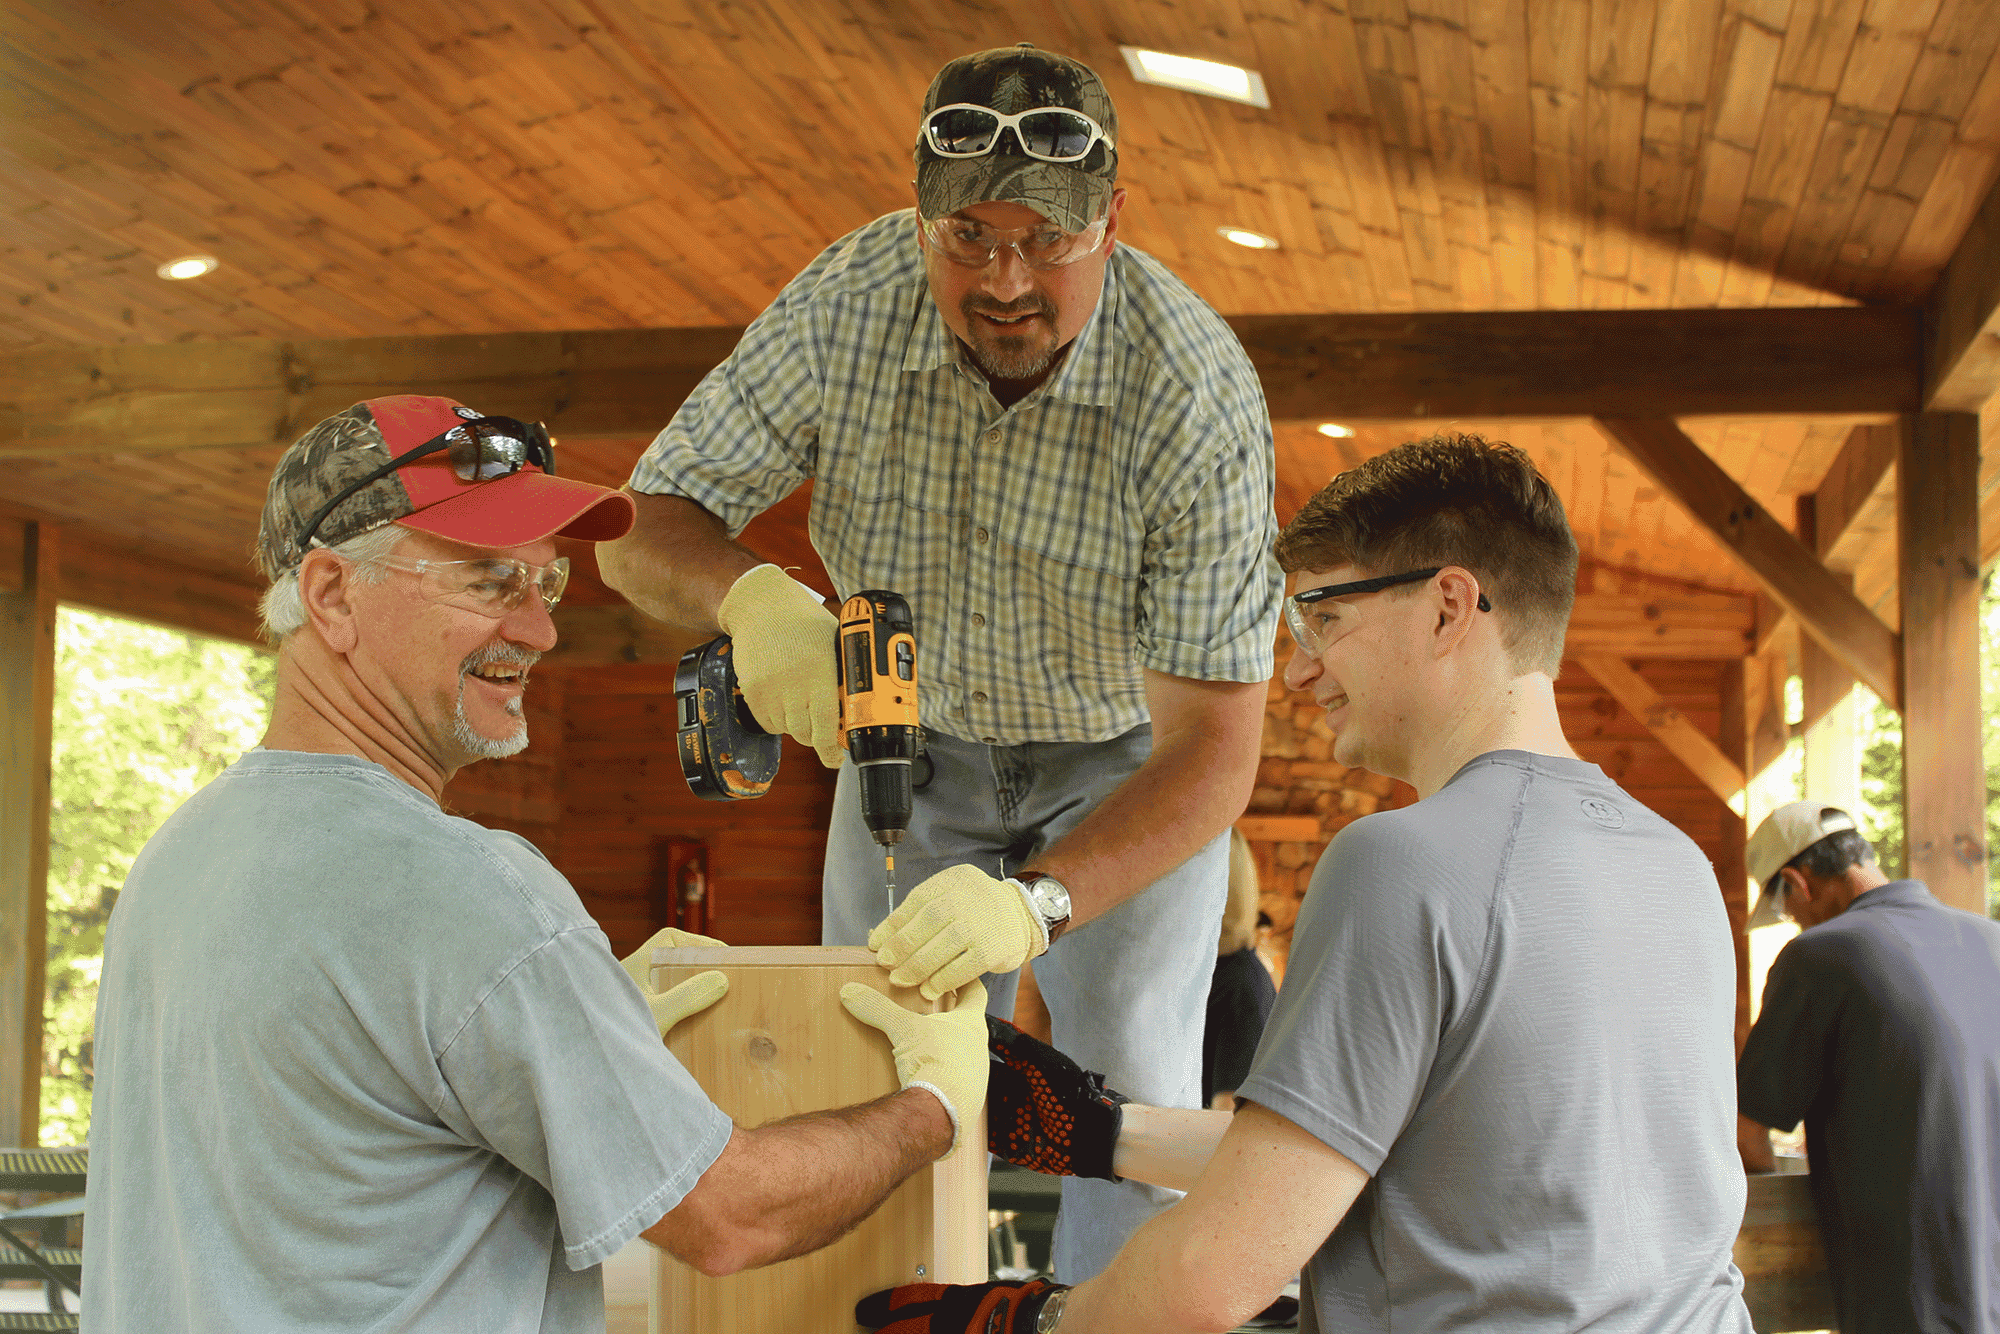 Photo of 3 men drilling nails into a birdhouse